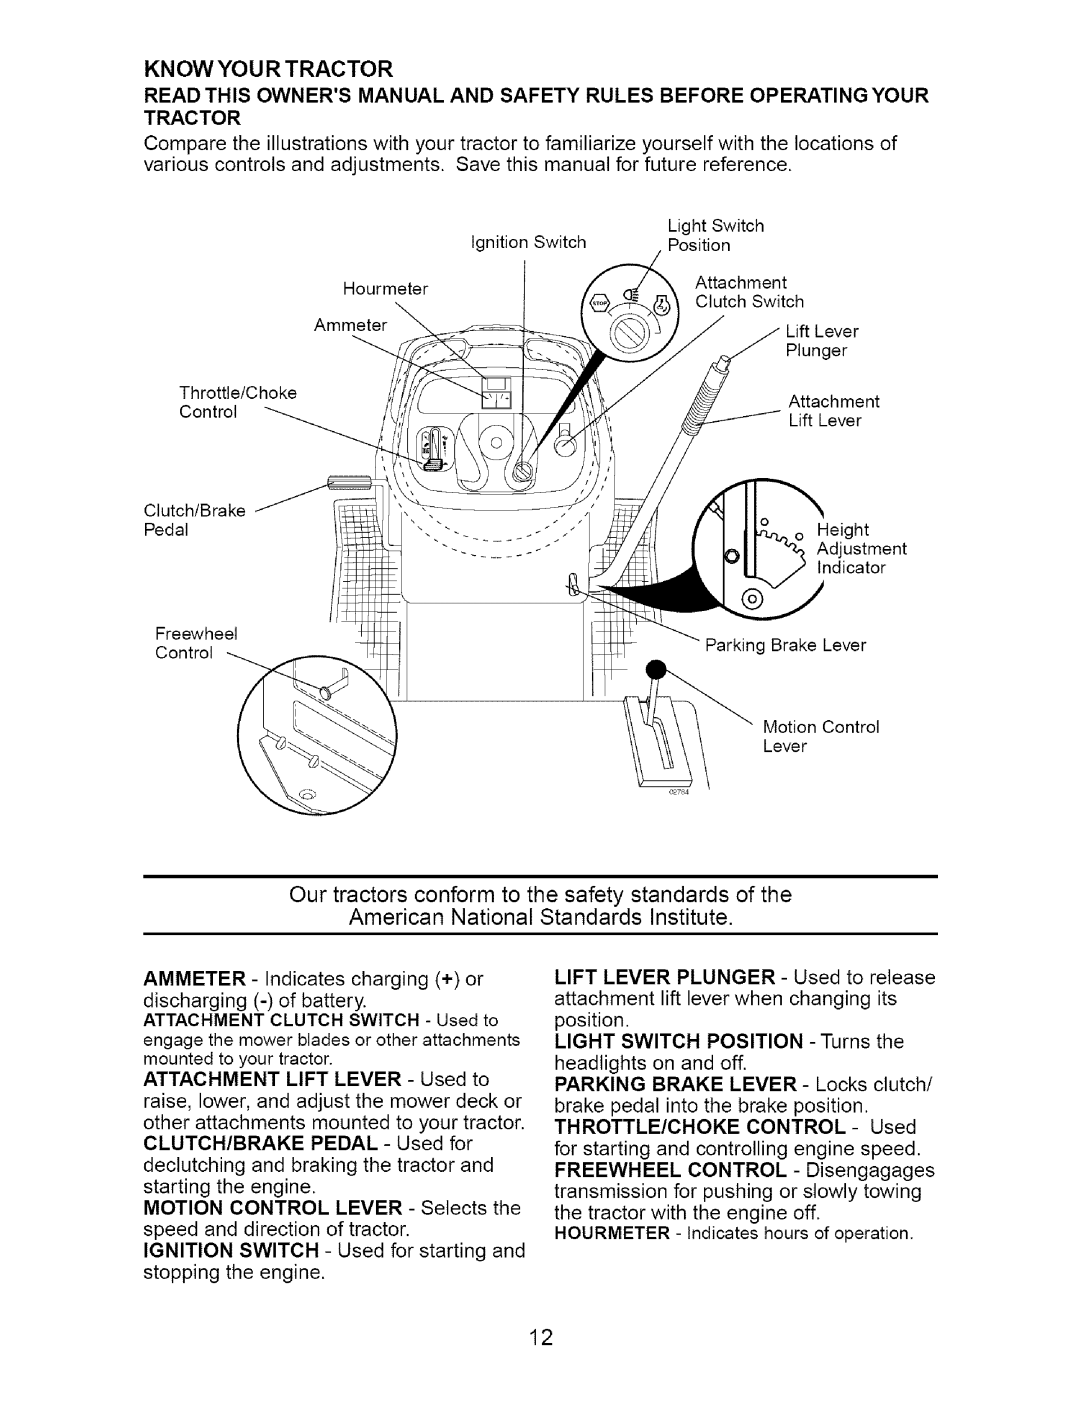 Craftsman 917.273648 manual Kn Ow You R Tractor, American National Standards Institute 